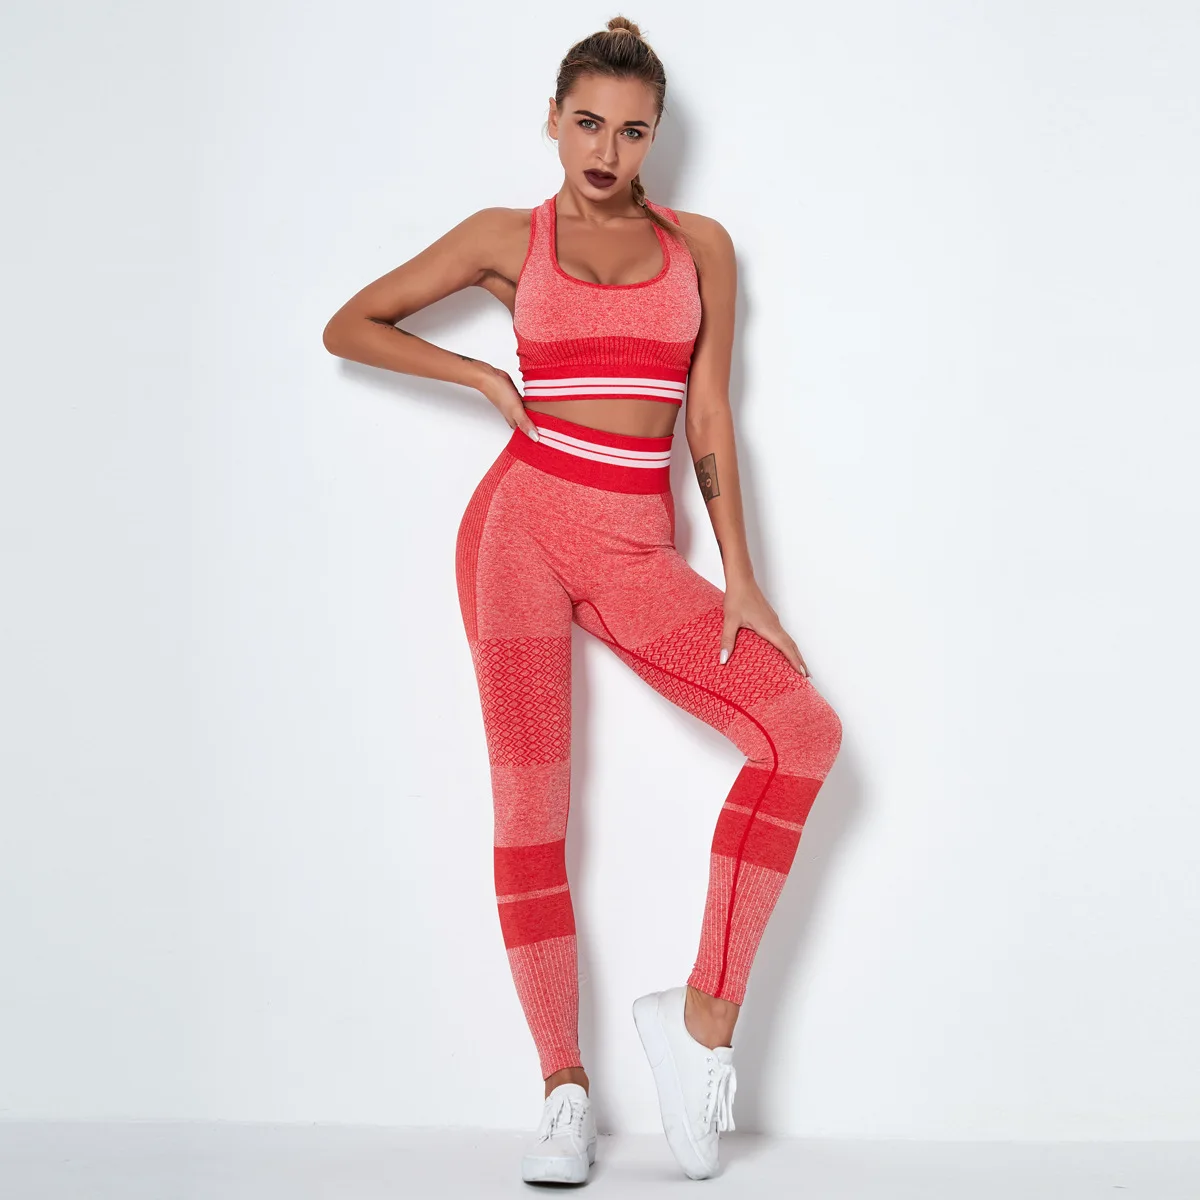 

Top Quality Women Yoga Slimming Clothes Seamless Knit High Waist Lift Hip Pants Breathable Solid Color Sports Running Fitnes Set